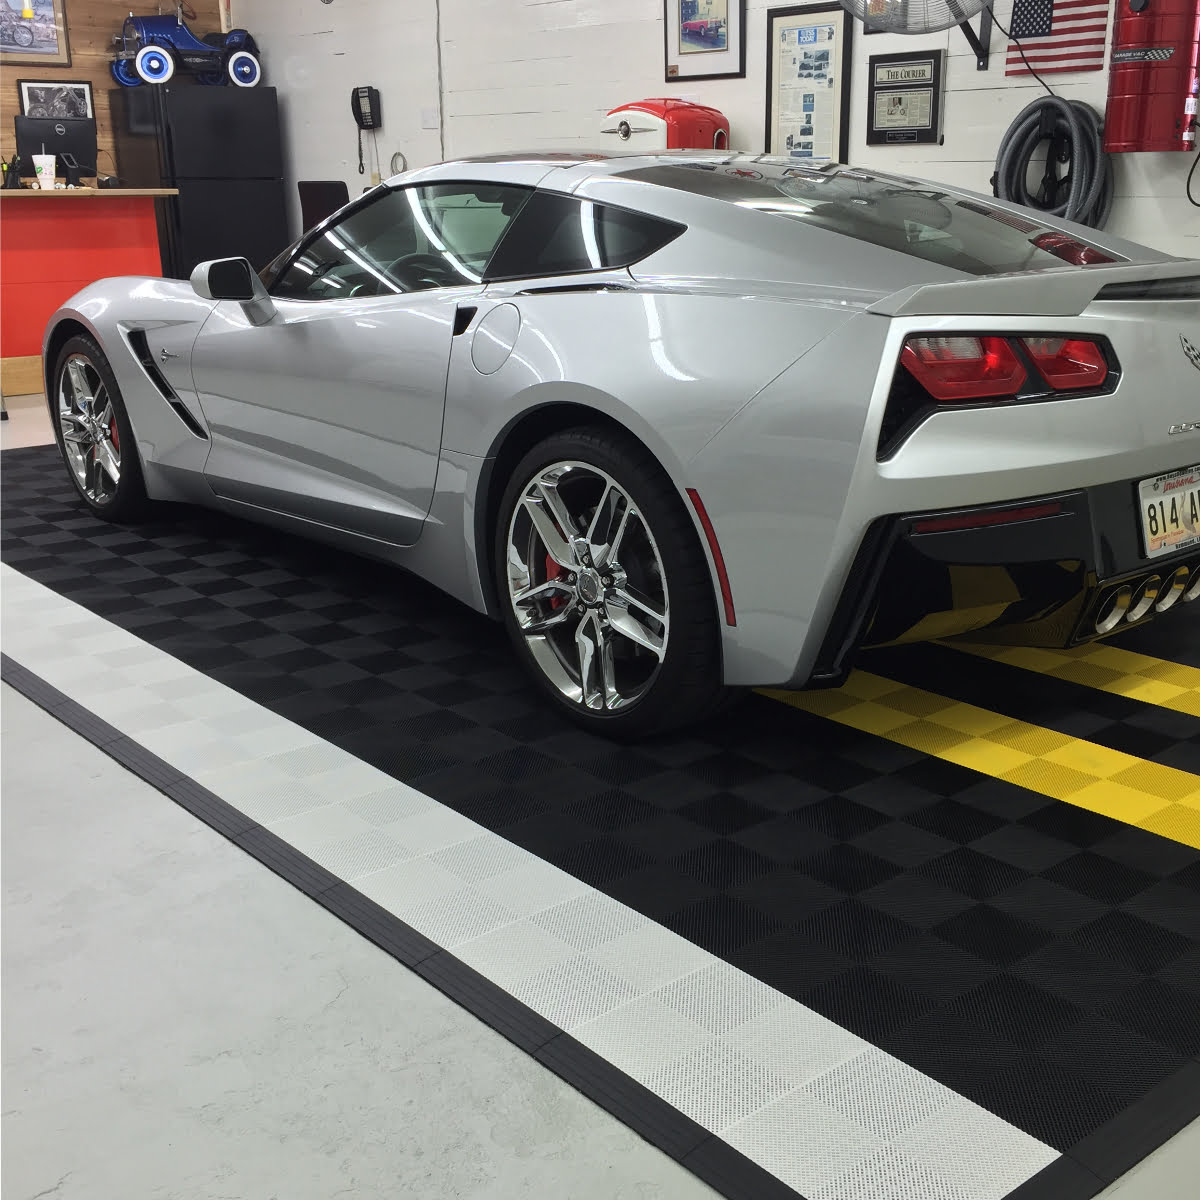 Corvette on a mat with our interlocking Perforated black, white and yellow tiles.